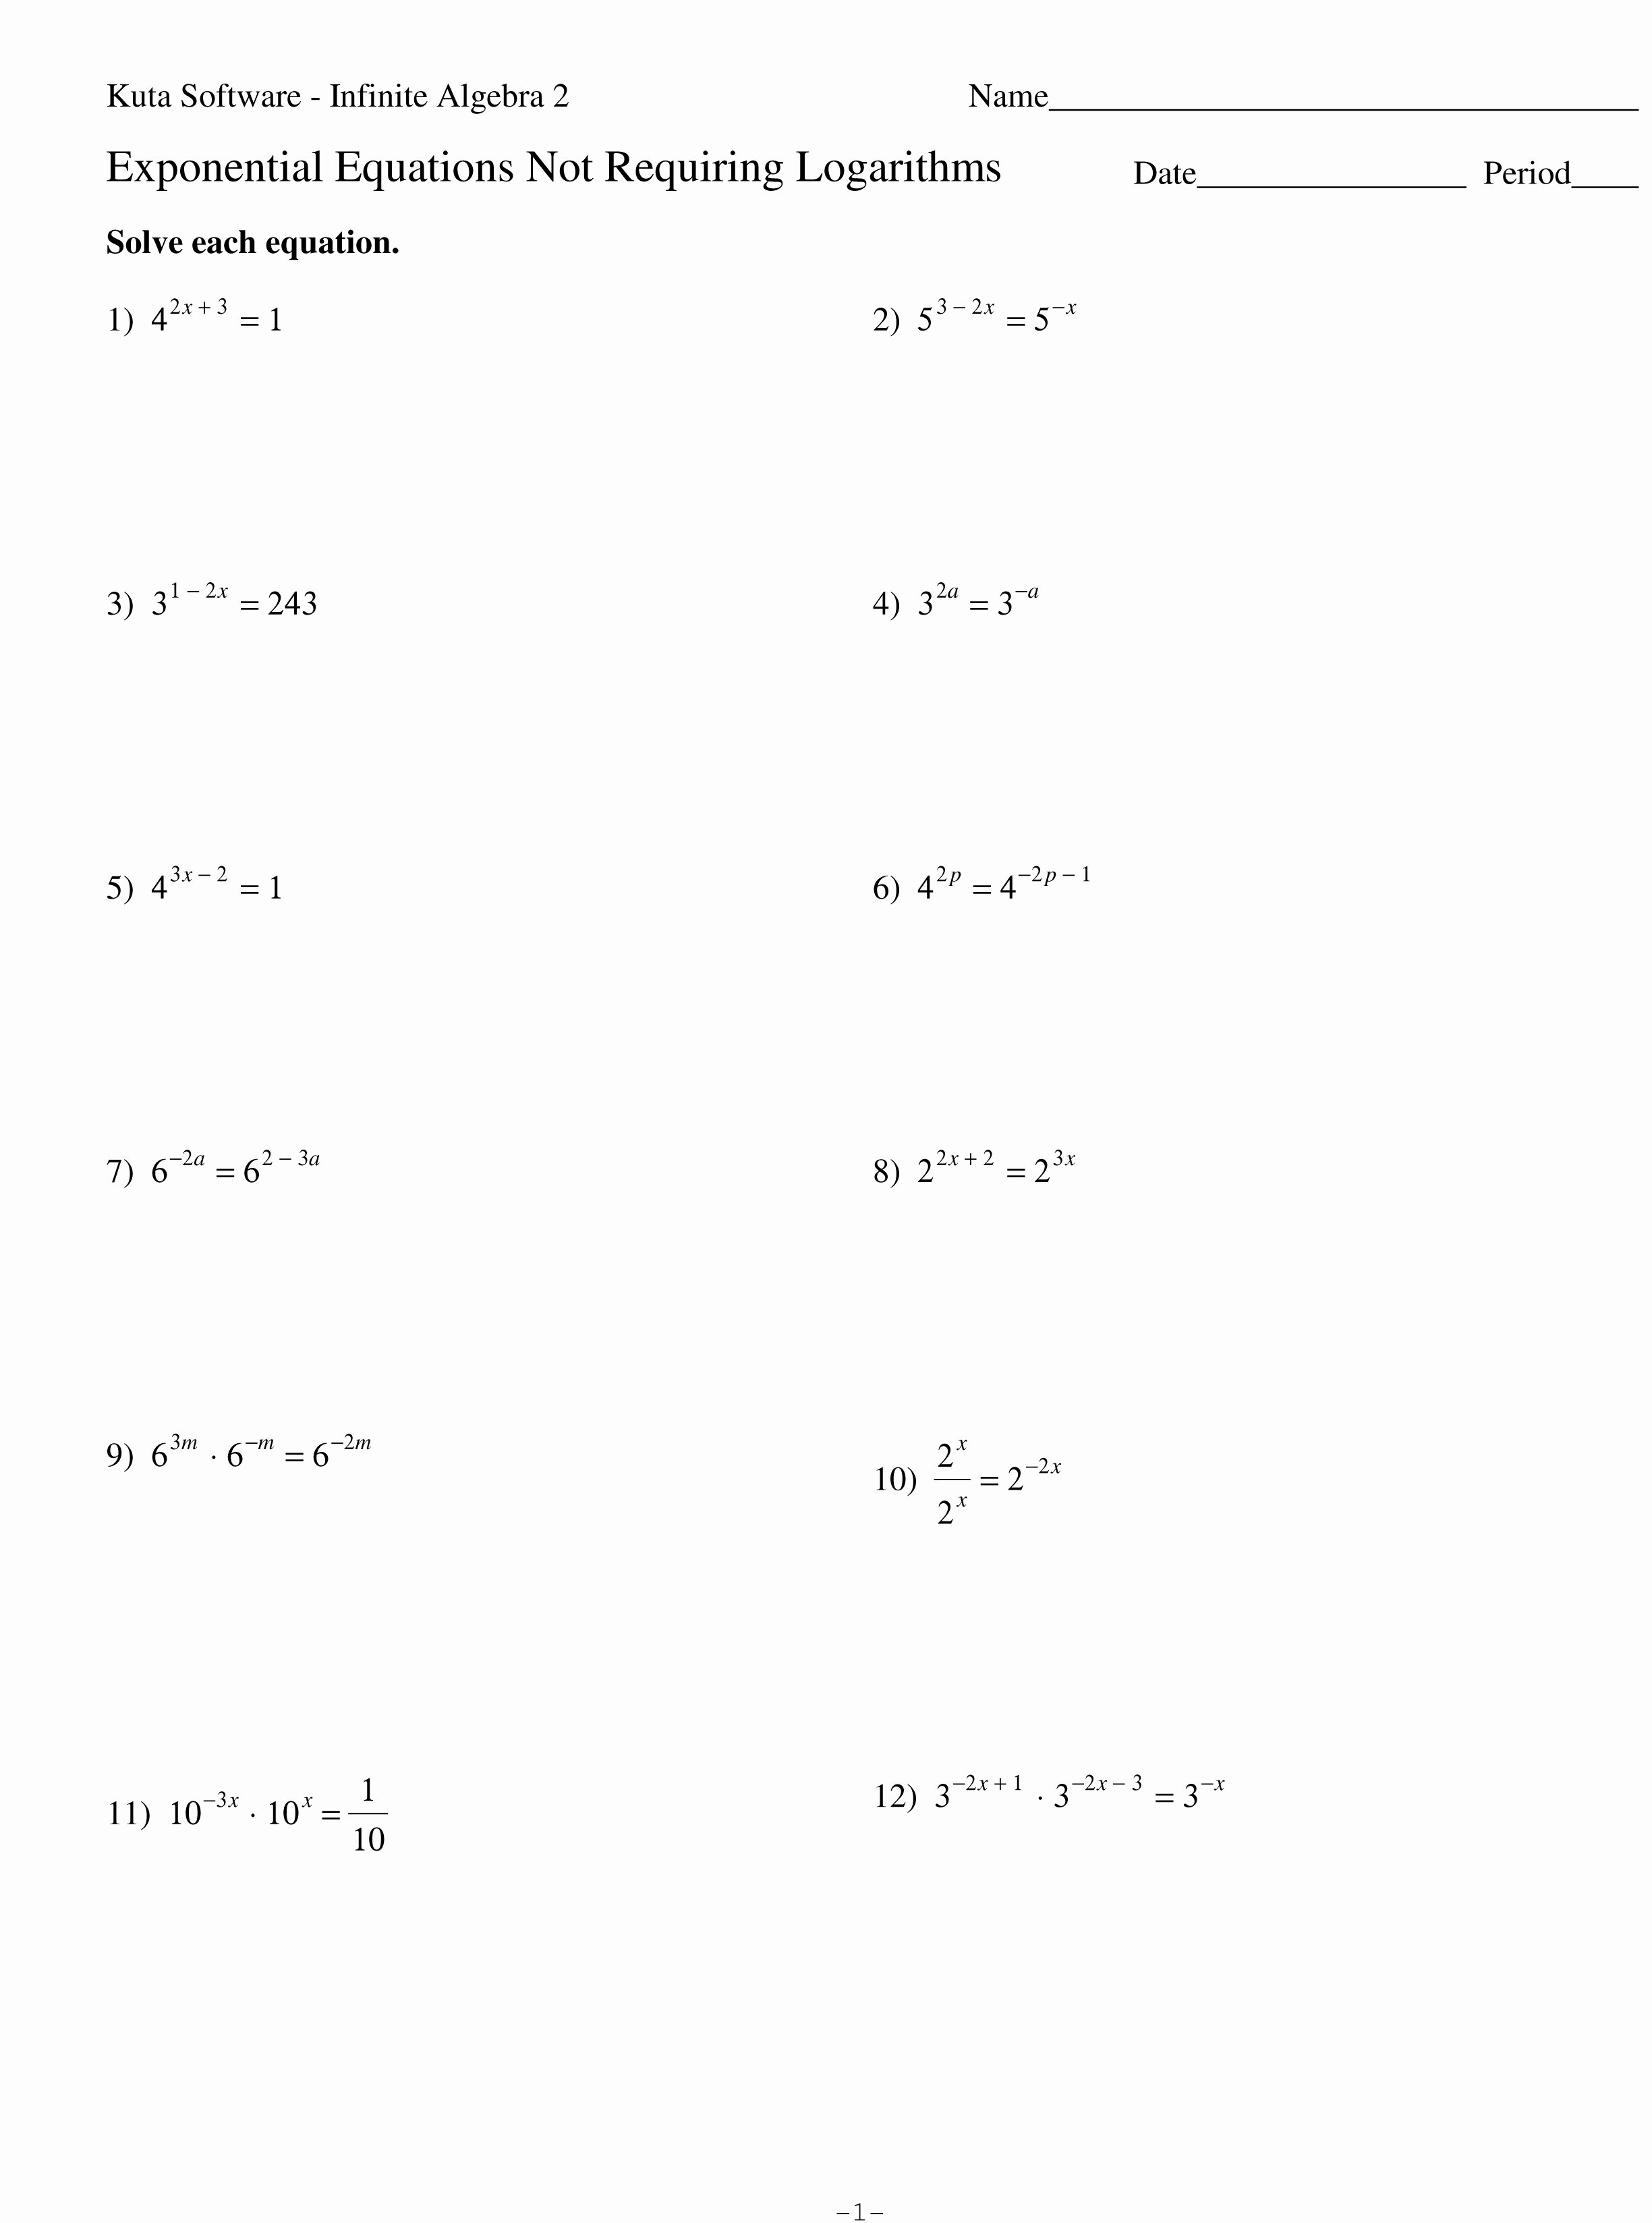 Logarithmic Equations Worksheet with Answers Lovely Homework Exponential Equations